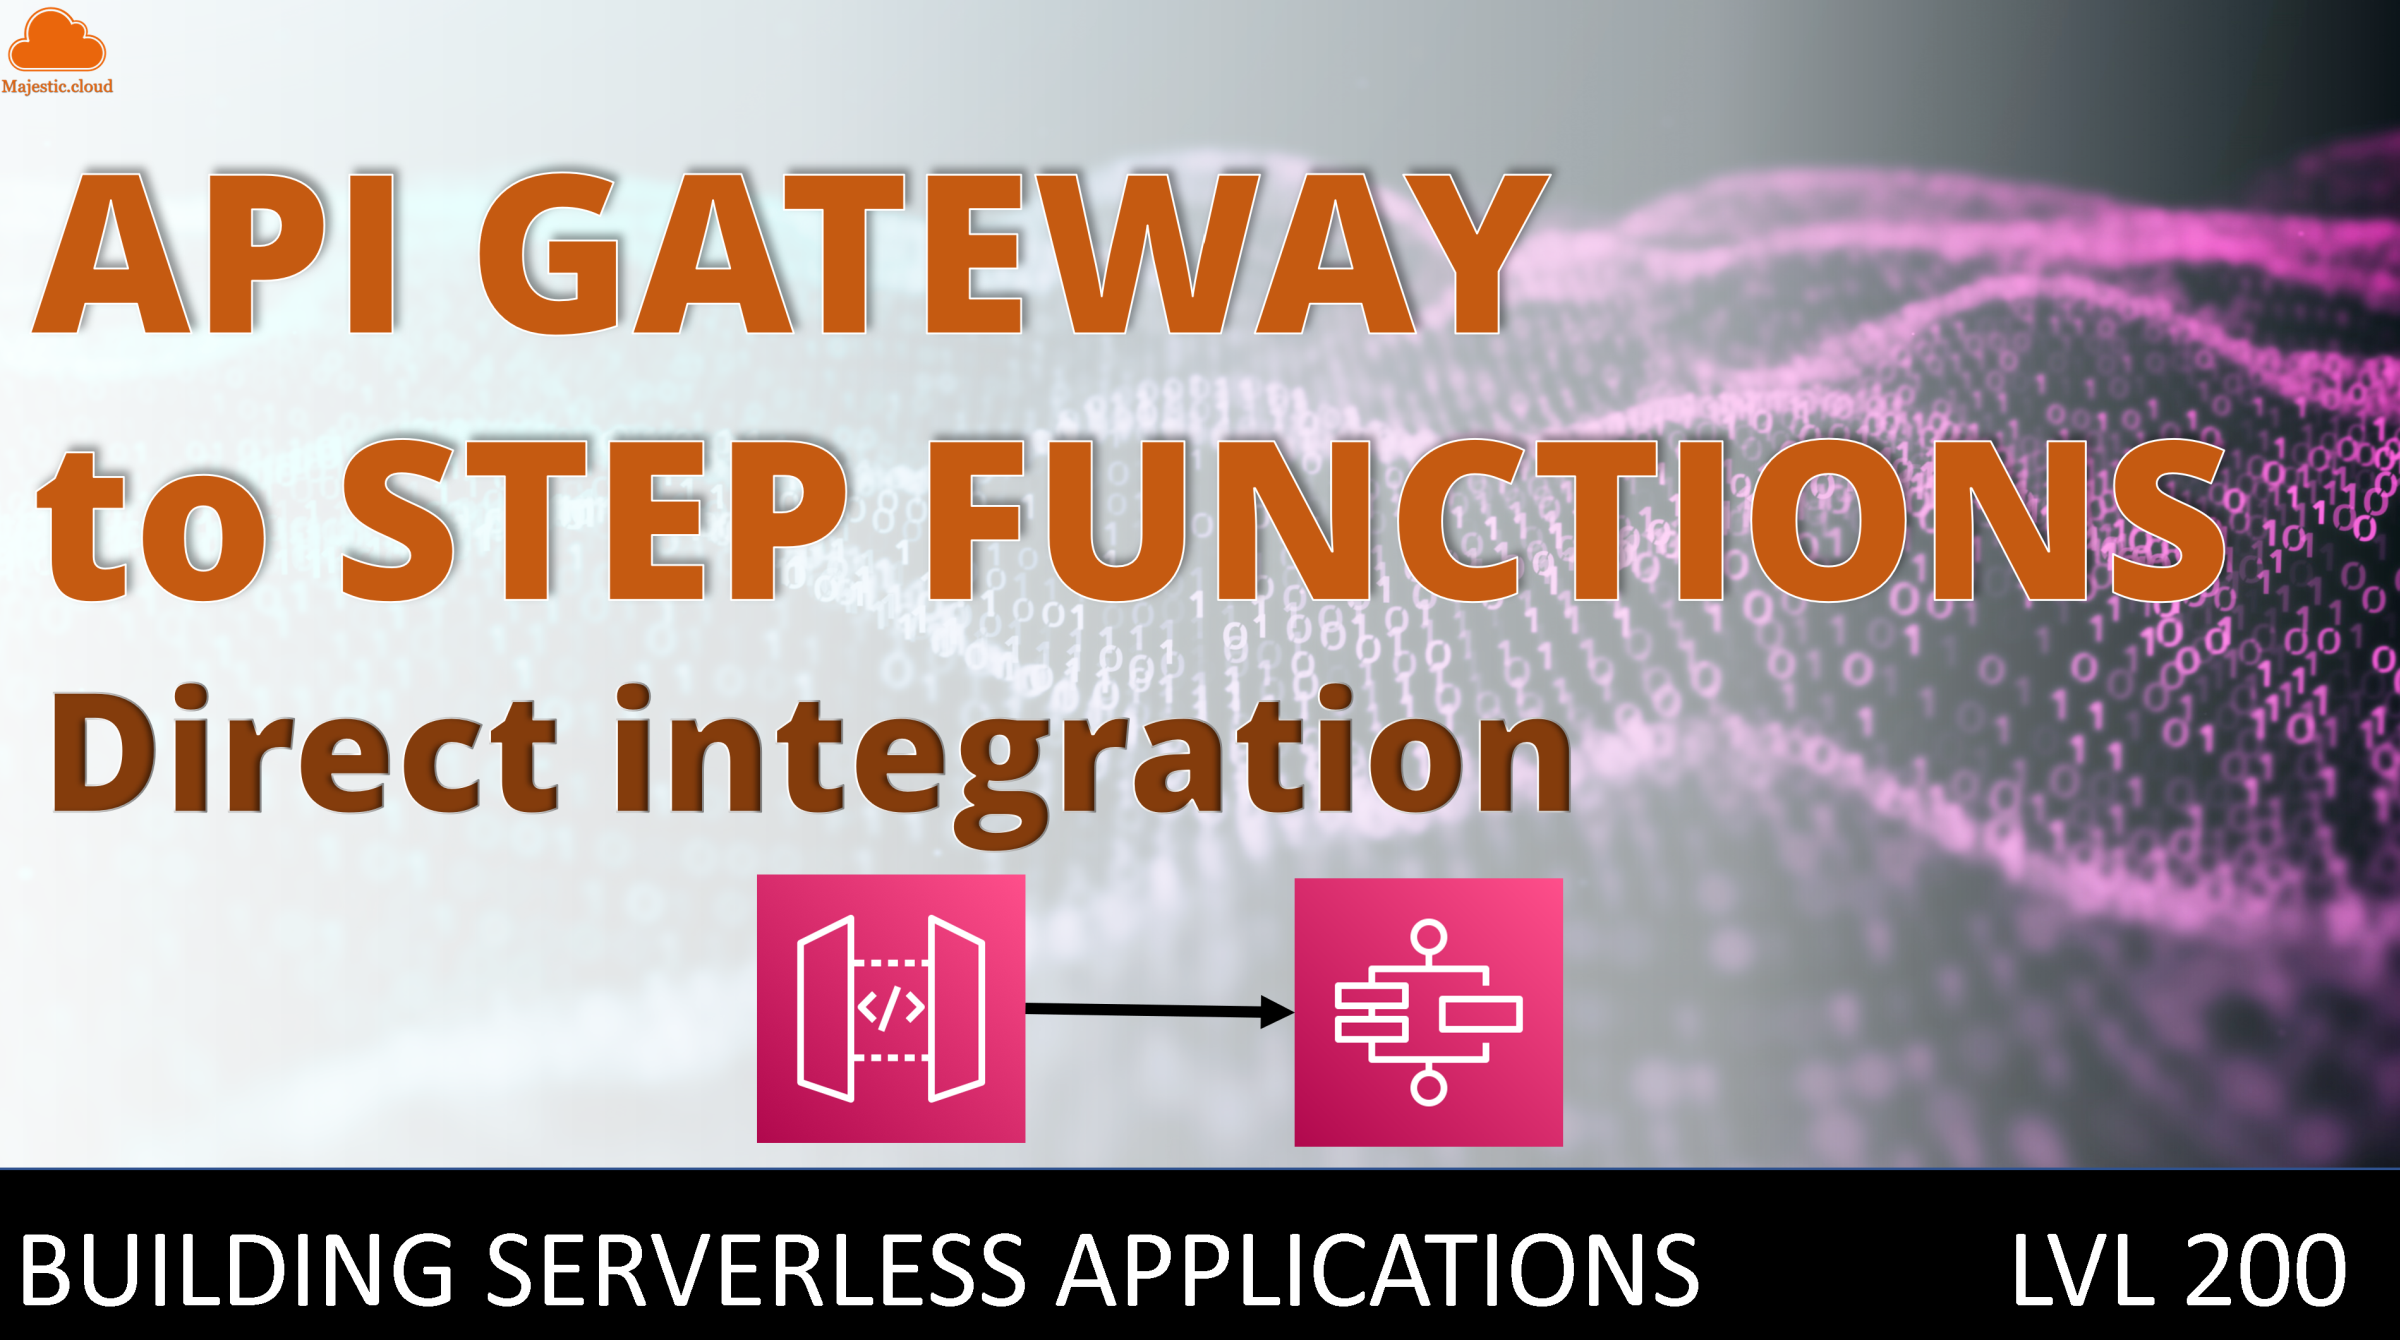 API Gateway calling Step Functions - a direct integration from an API to a state machine workflow